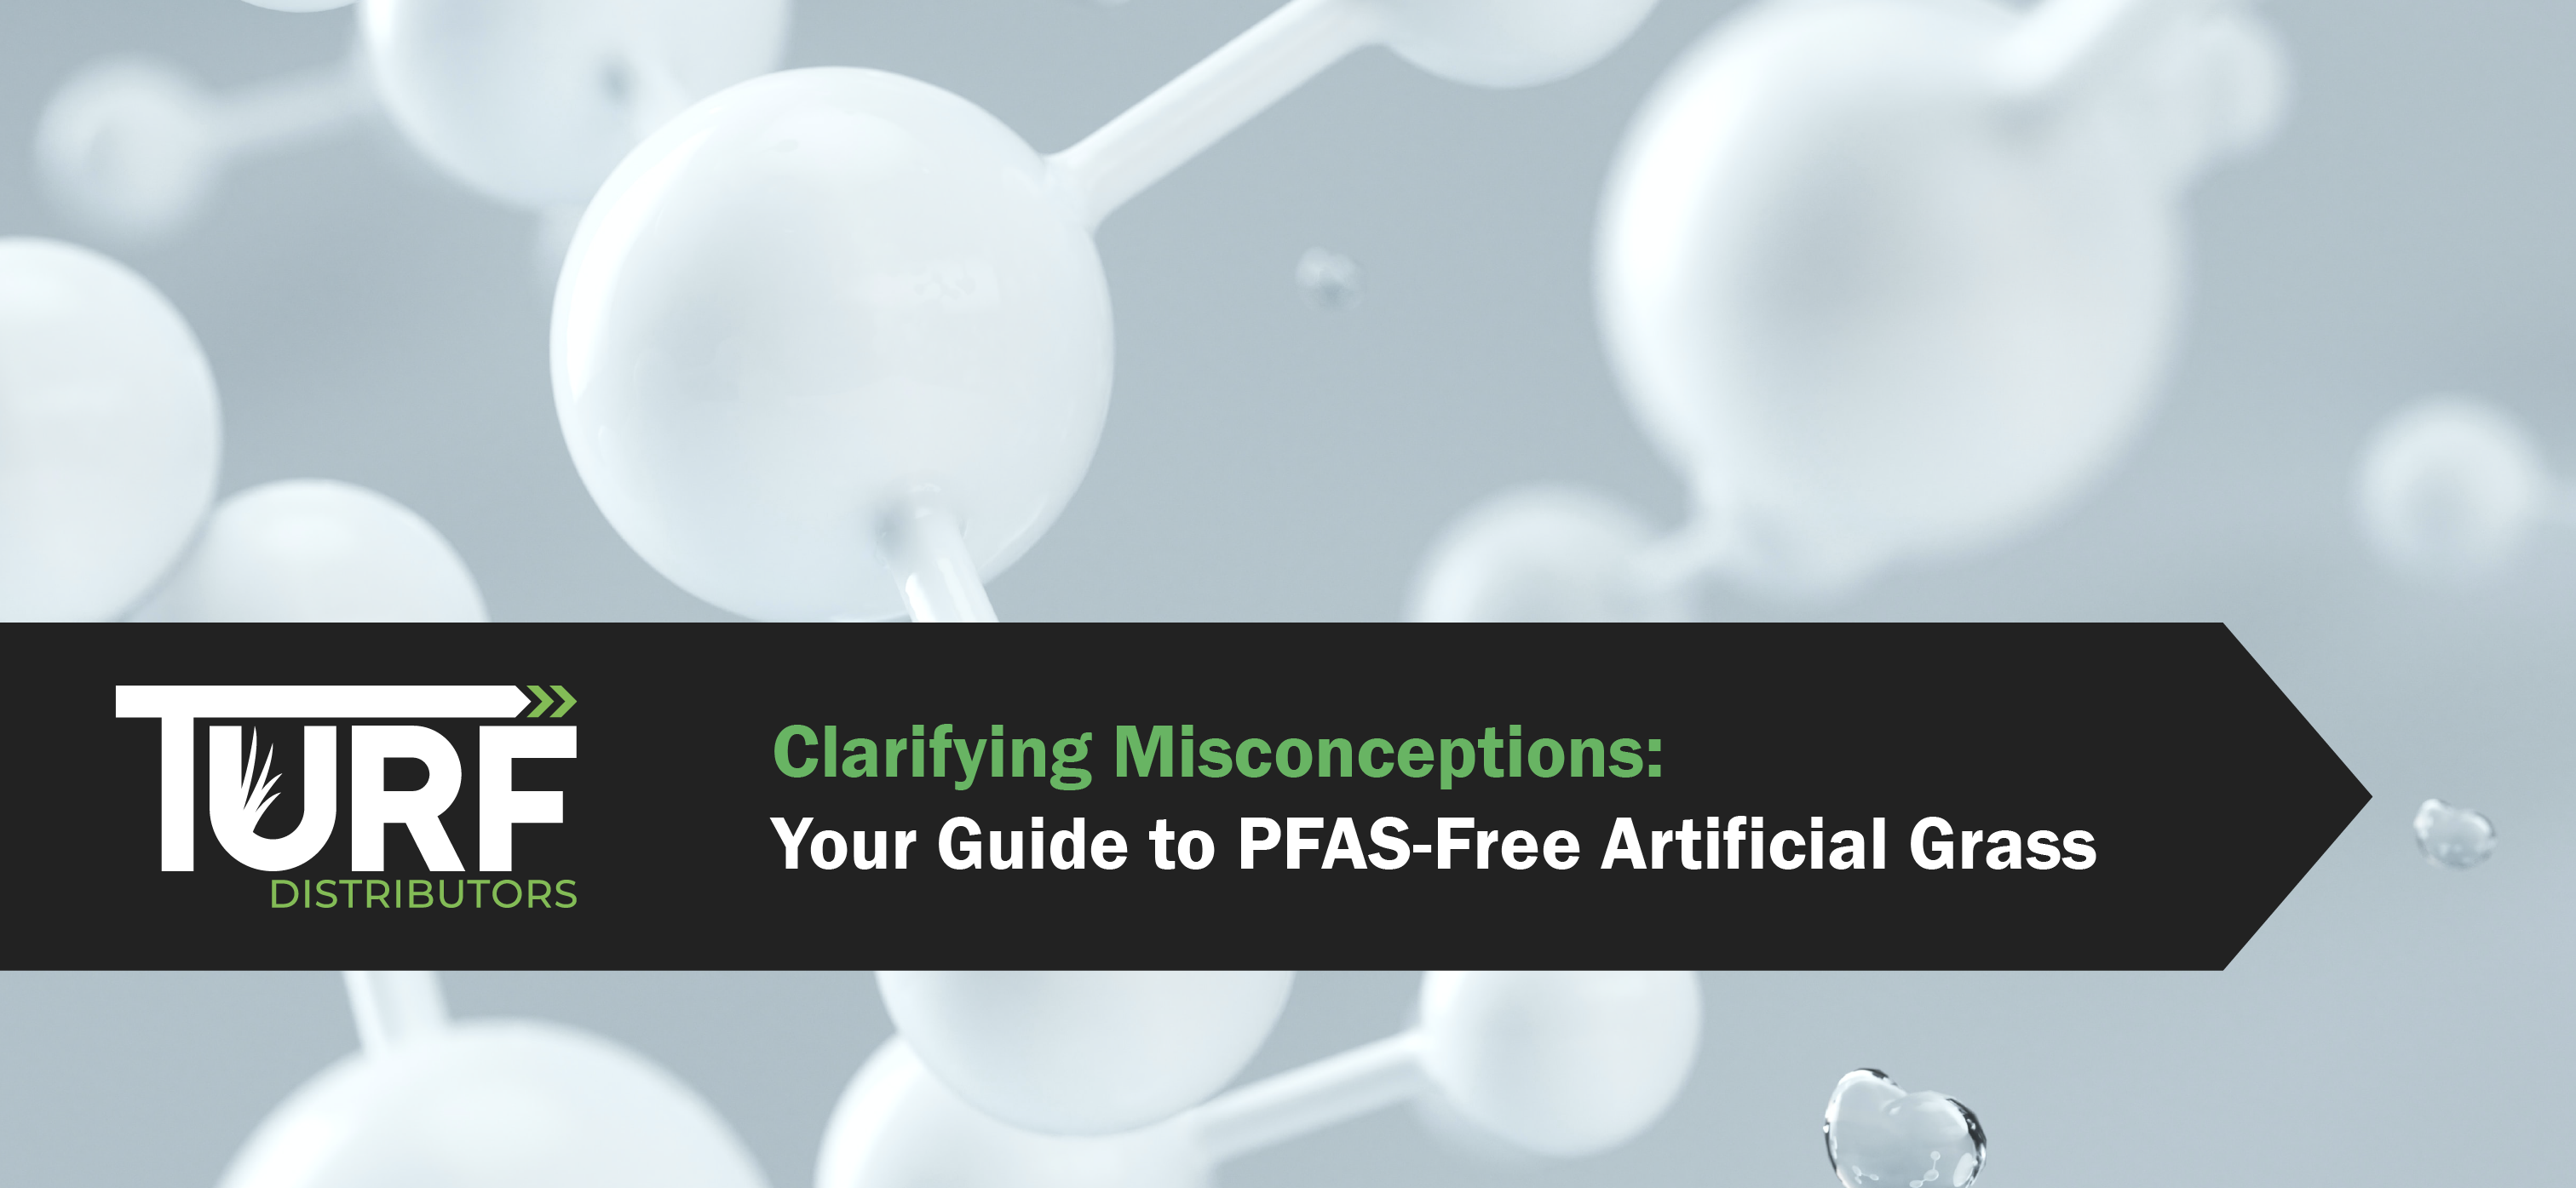 Clarifying Misconceptions: Your Guide to PFAS-Free and Safe Artificial Grass